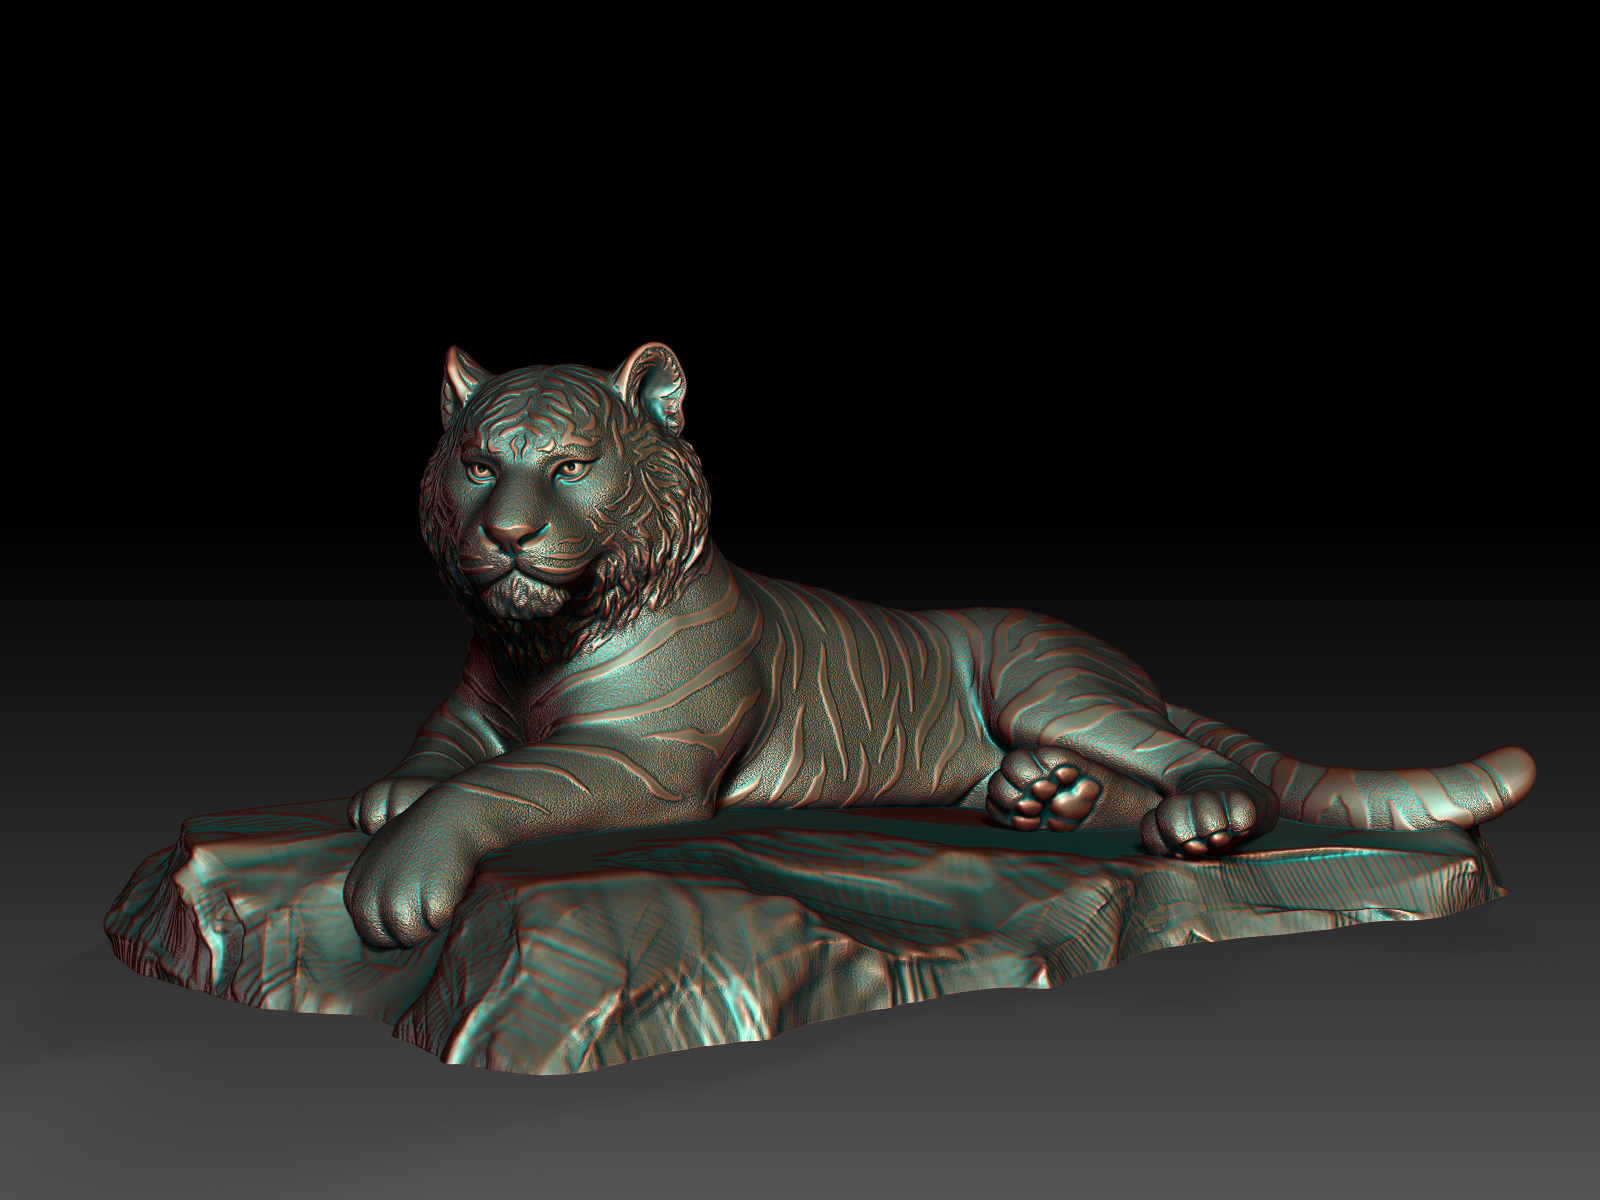 Tiger Digital Sculpture for 3D Printing and Production